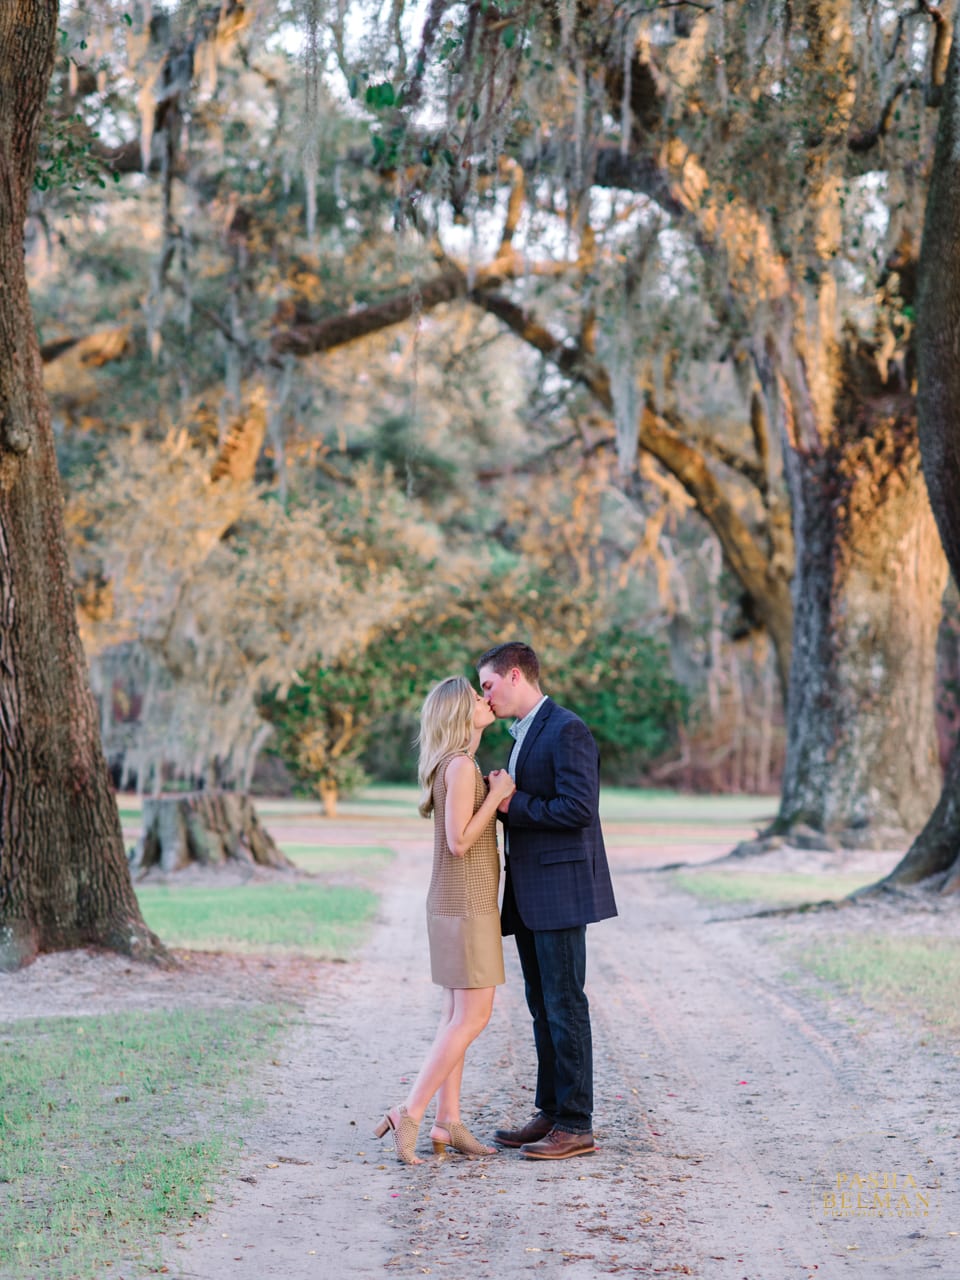 Mansfield Plantation Engagement Pictures | Charleston Engagement Photography and Ideas for Engaged Couples